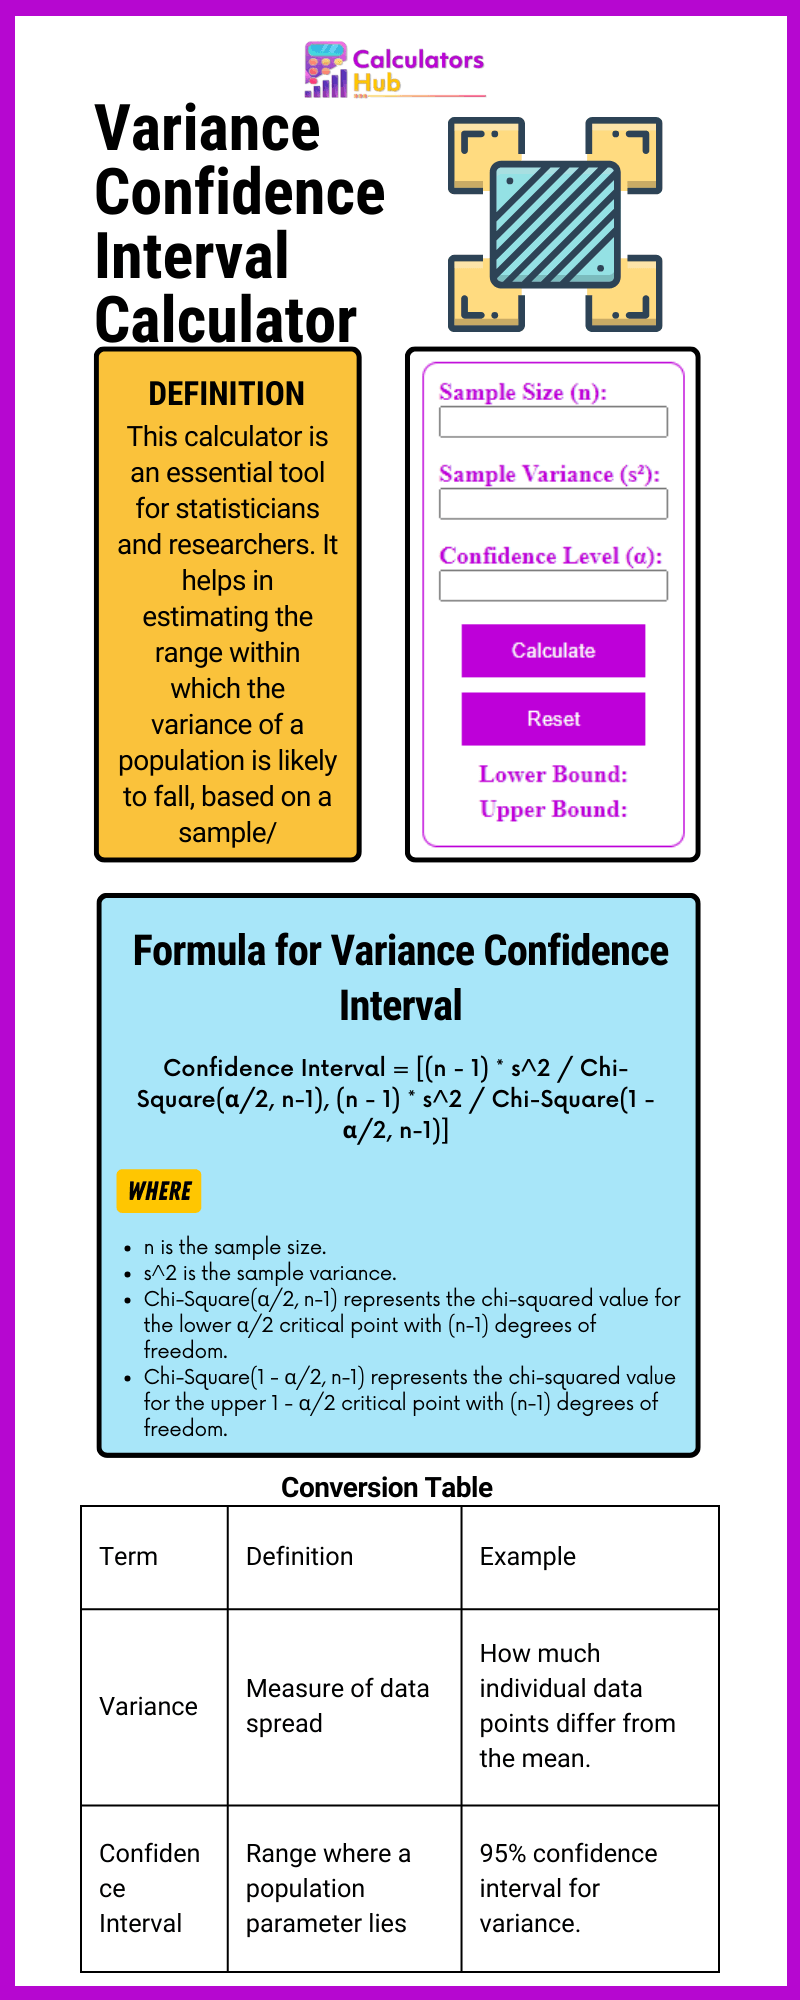 Variance Confidence Interval Calculator